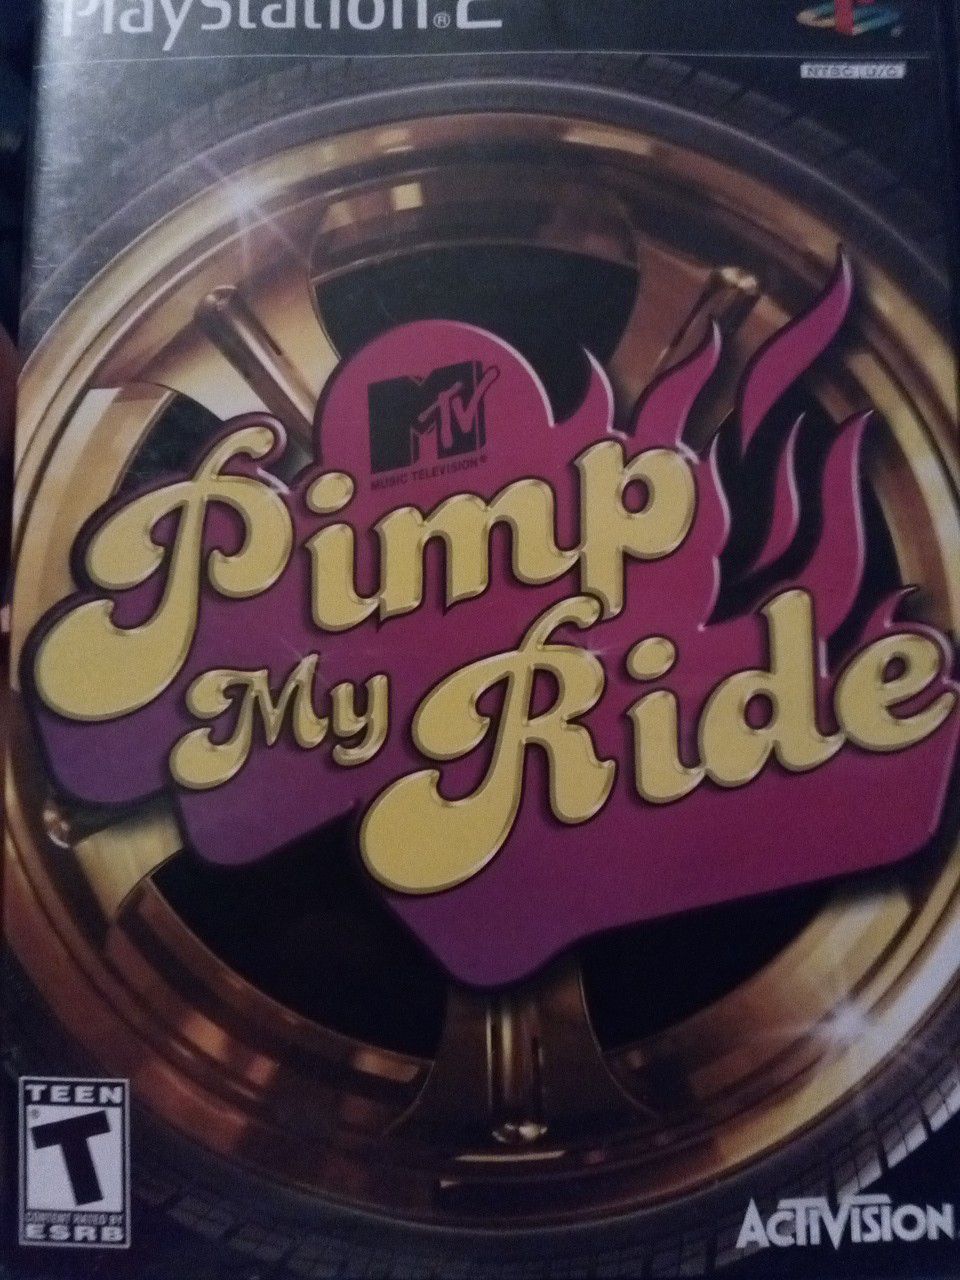 Pimp my ride (Ps2, PlayStation 2)